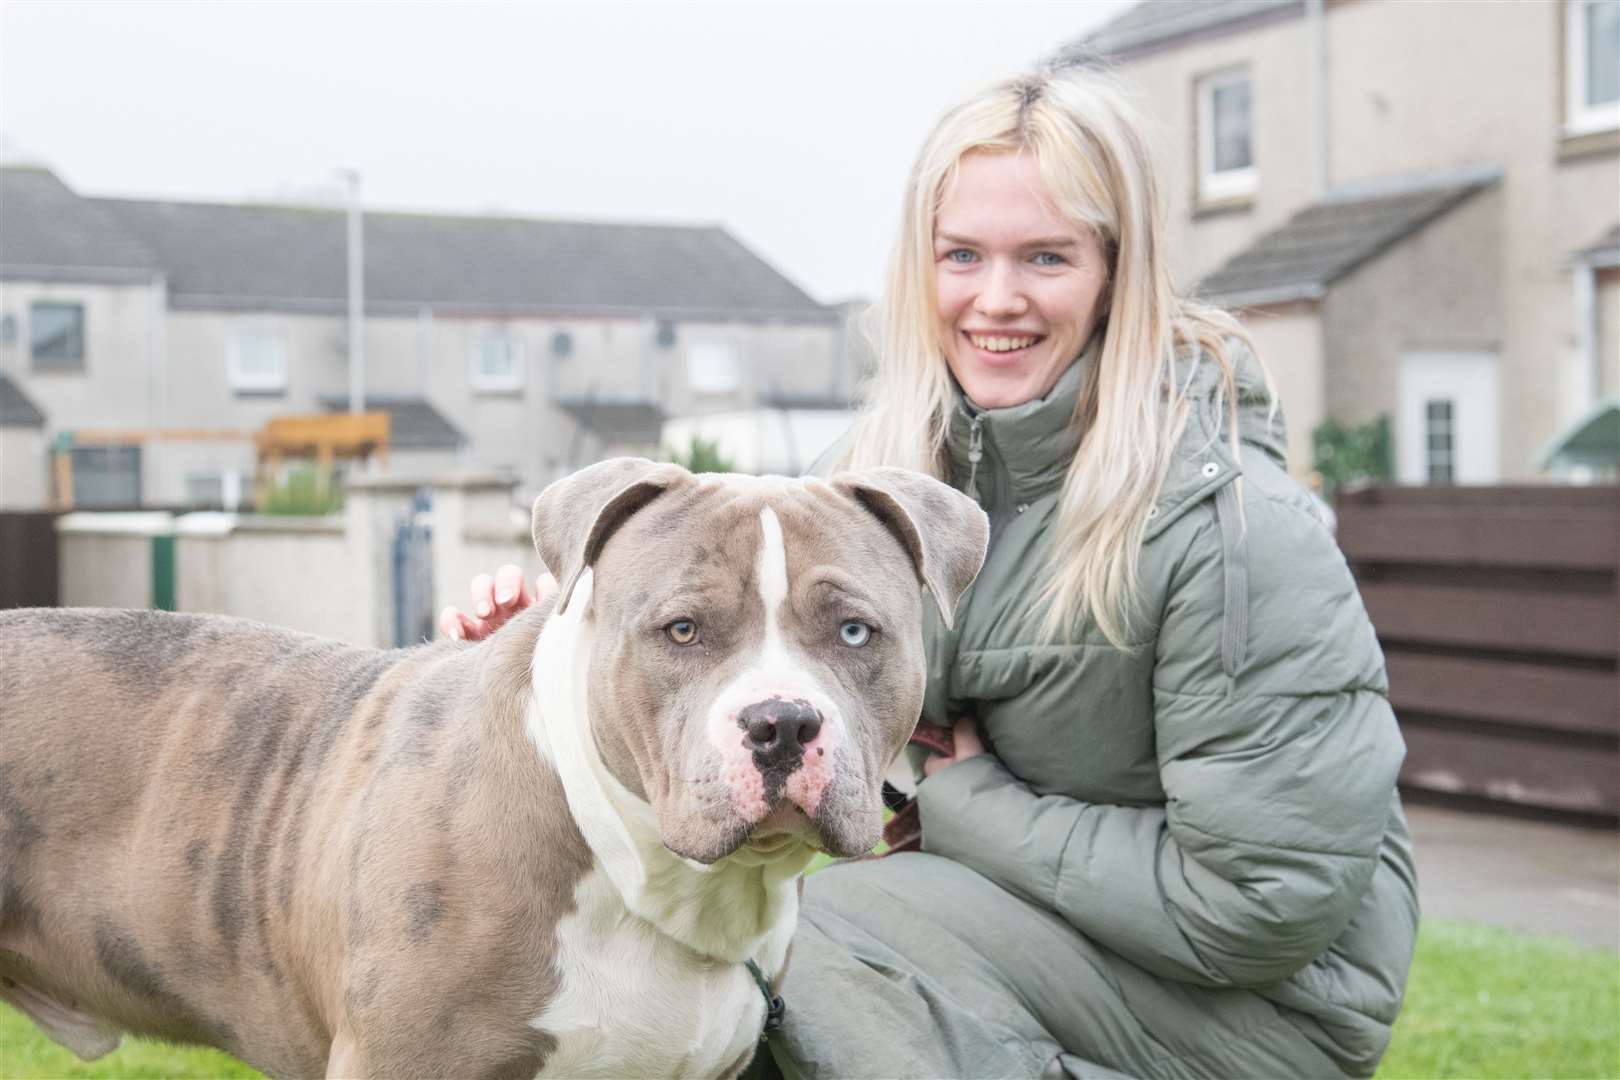 Taylor Stirling, from Keith, has been rehoming XL Bully dogs from England following the ban in England and Wales. Picture: Daniel Forsyth